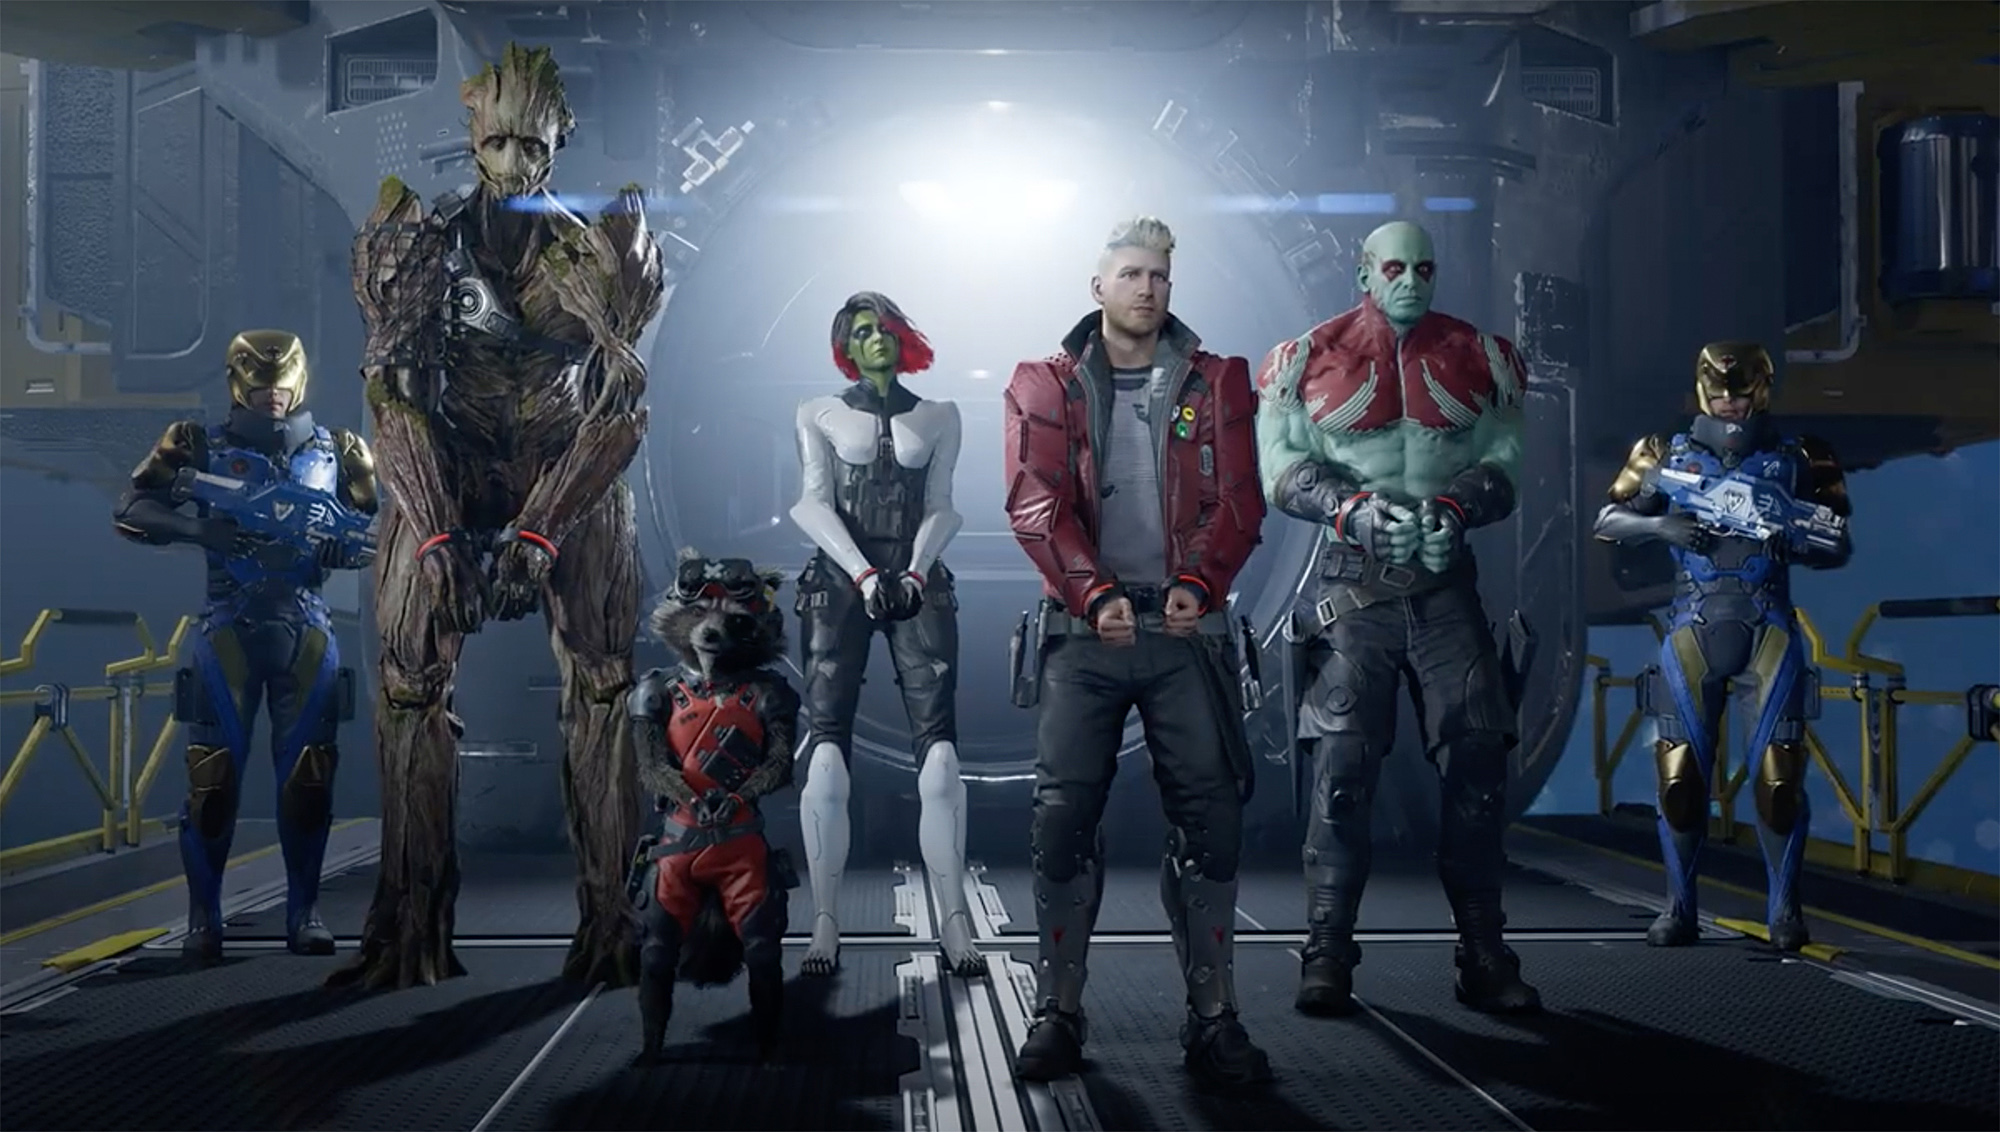 guardians-of-the-galaxy-video-game-stuck-in-avengers-shadow-bloomberg